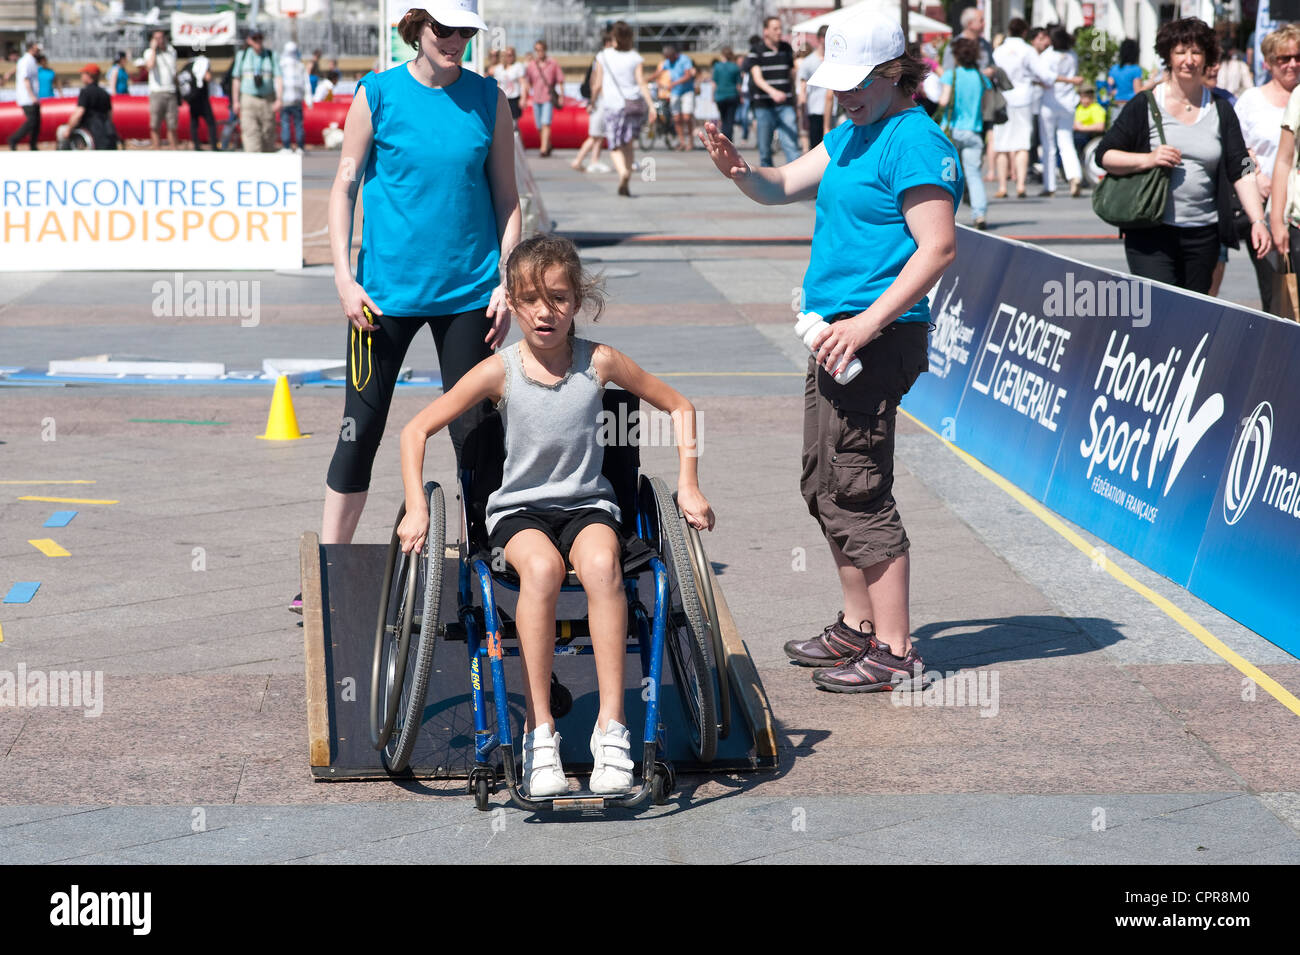 Paris, France - A young girl learning how to use a wheelchair. Stock Photo